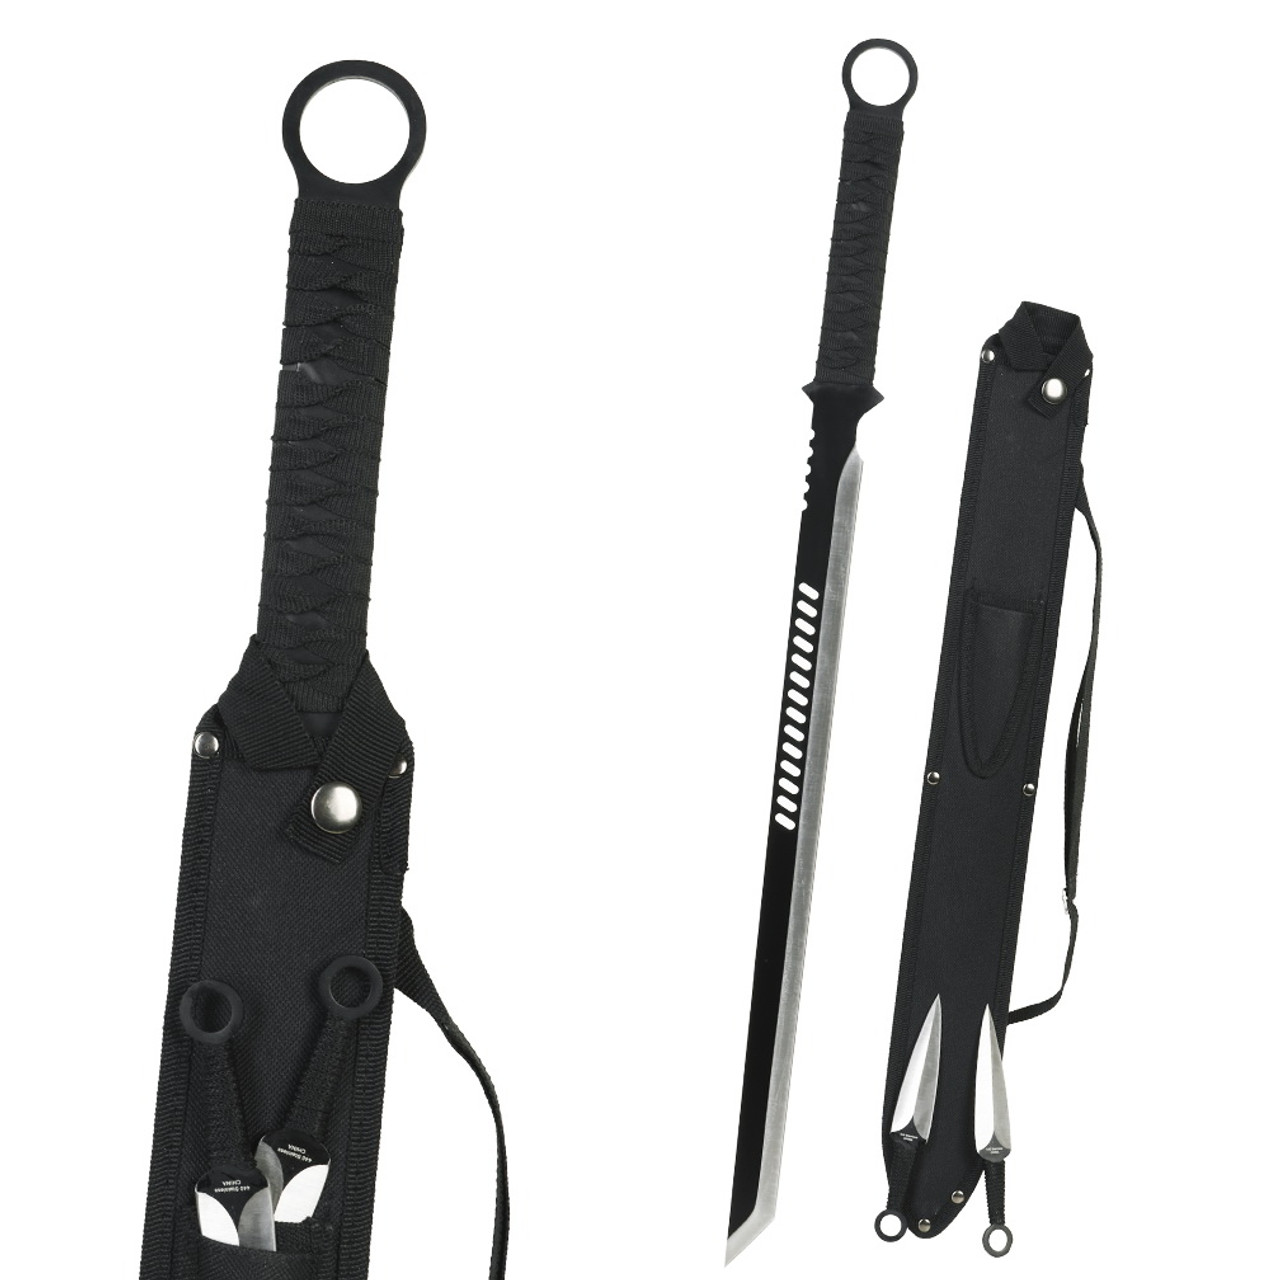 27 Two Tone Blade Ninja Machete Sword Black Cord Wrapped Handle, Including  Two Throwing Knives With Black Nylon Sheath